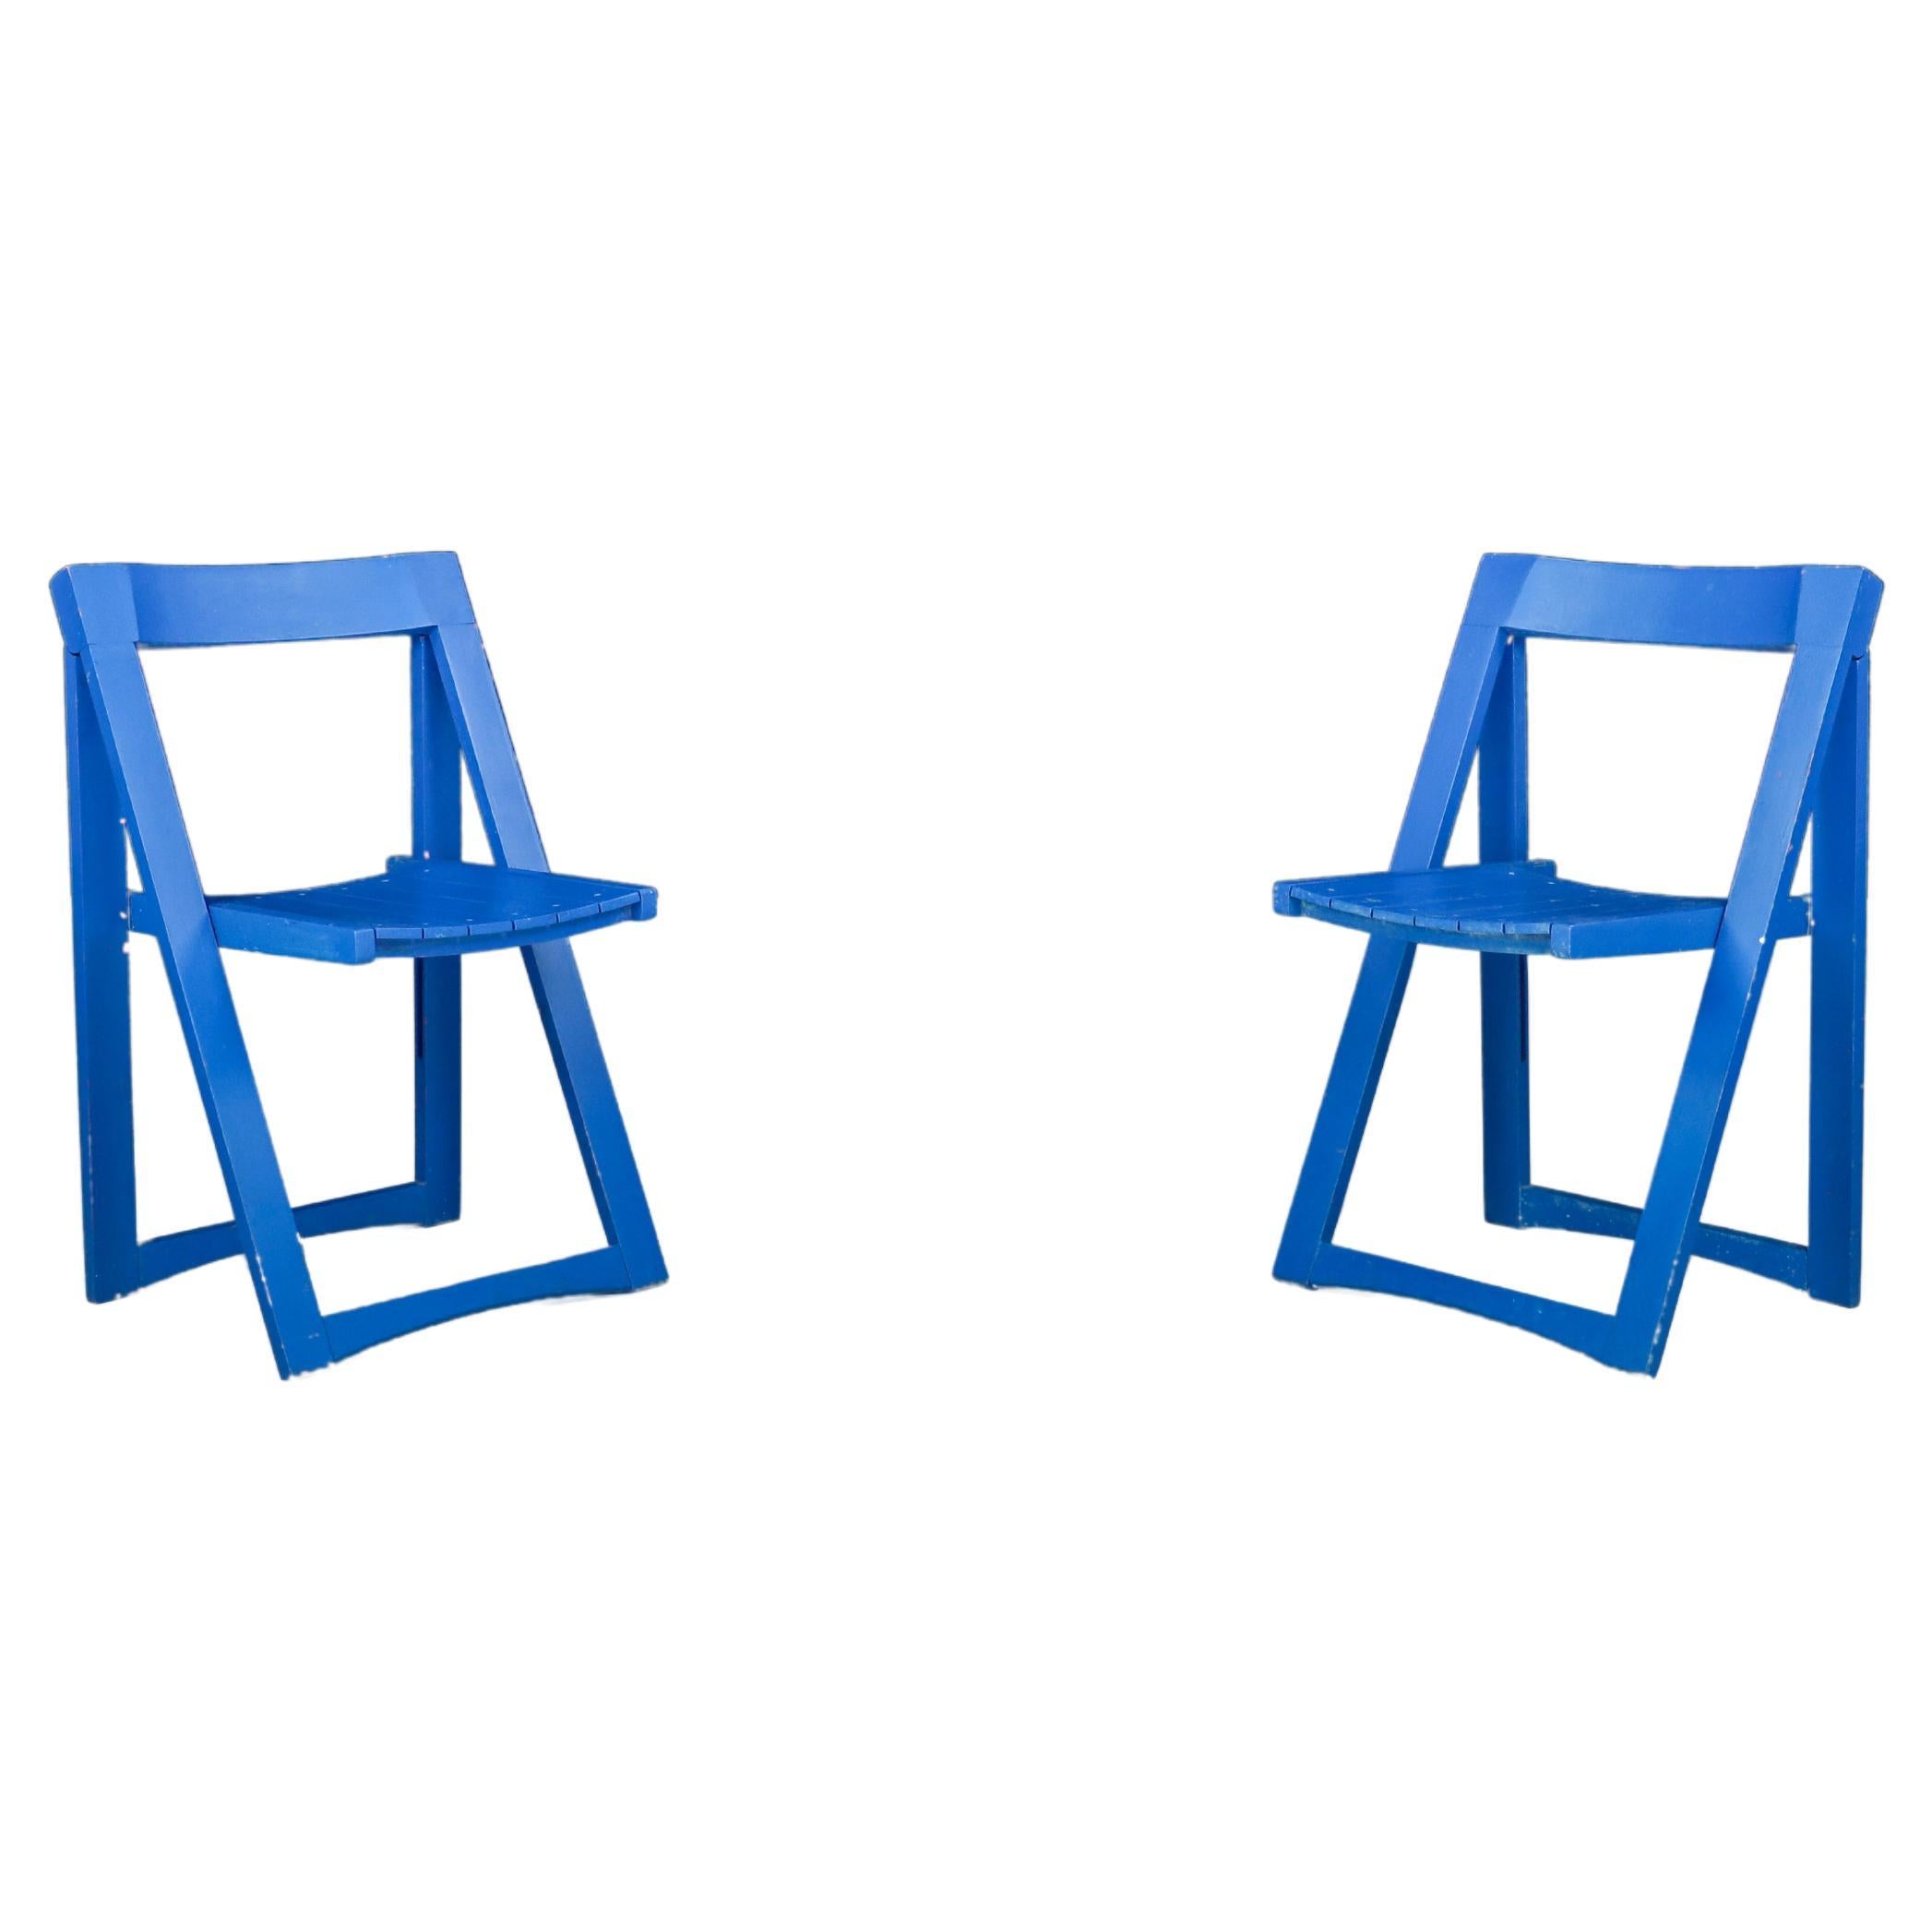 Aldo Jacober for Alberto Bazzani Blue Painted Folding Chairs Italy 1960 Set 2 For Sale